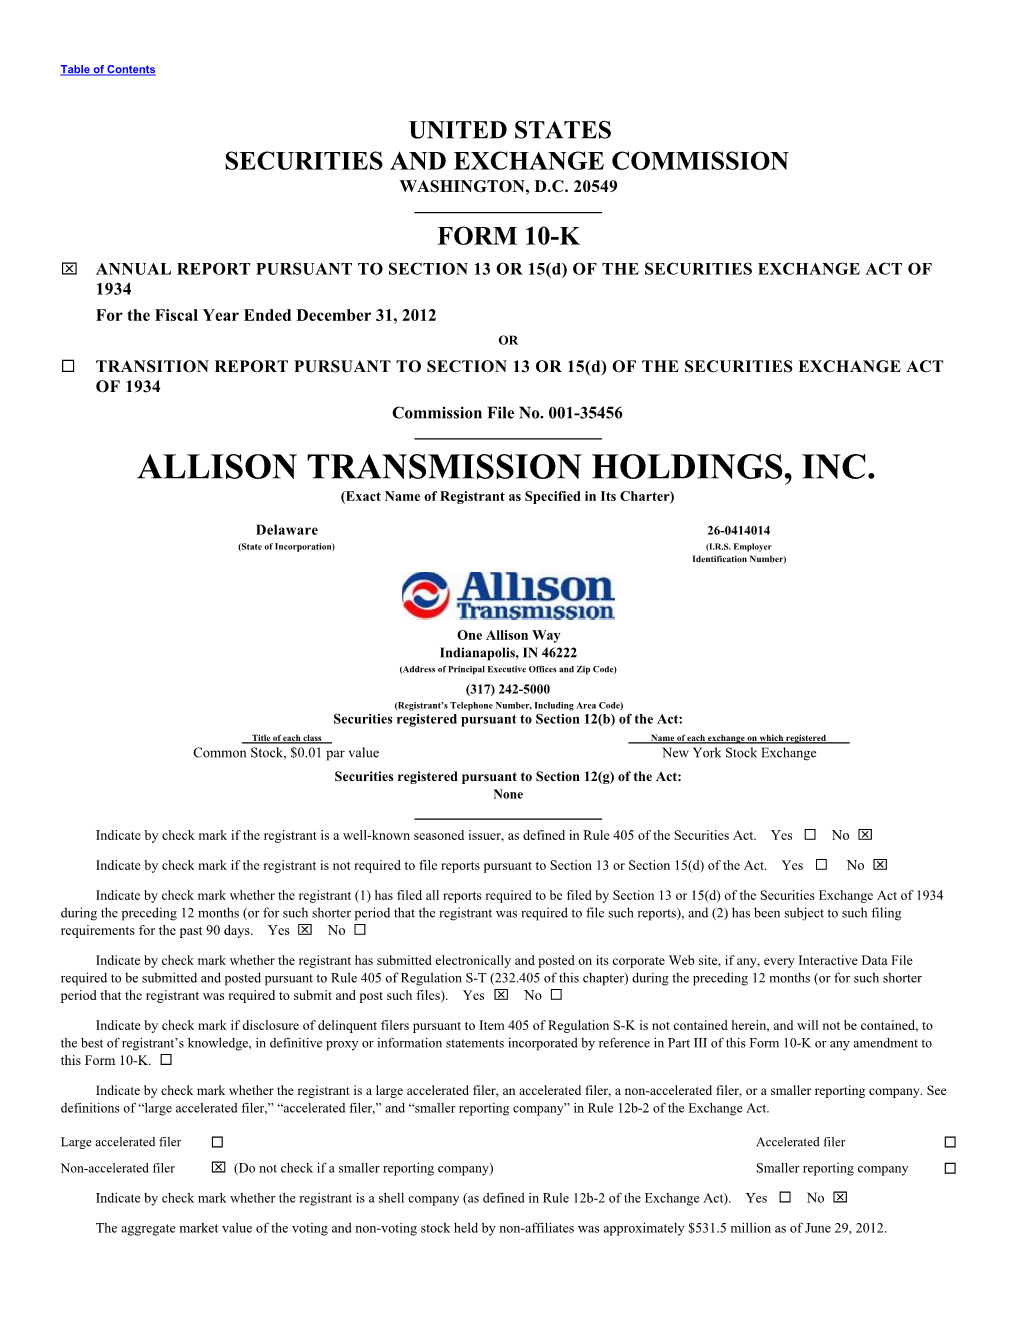 ALLISON TRANSMISSION HOLDINGS, INC. (Exact Name of Registrant As Specified in Its Charter)